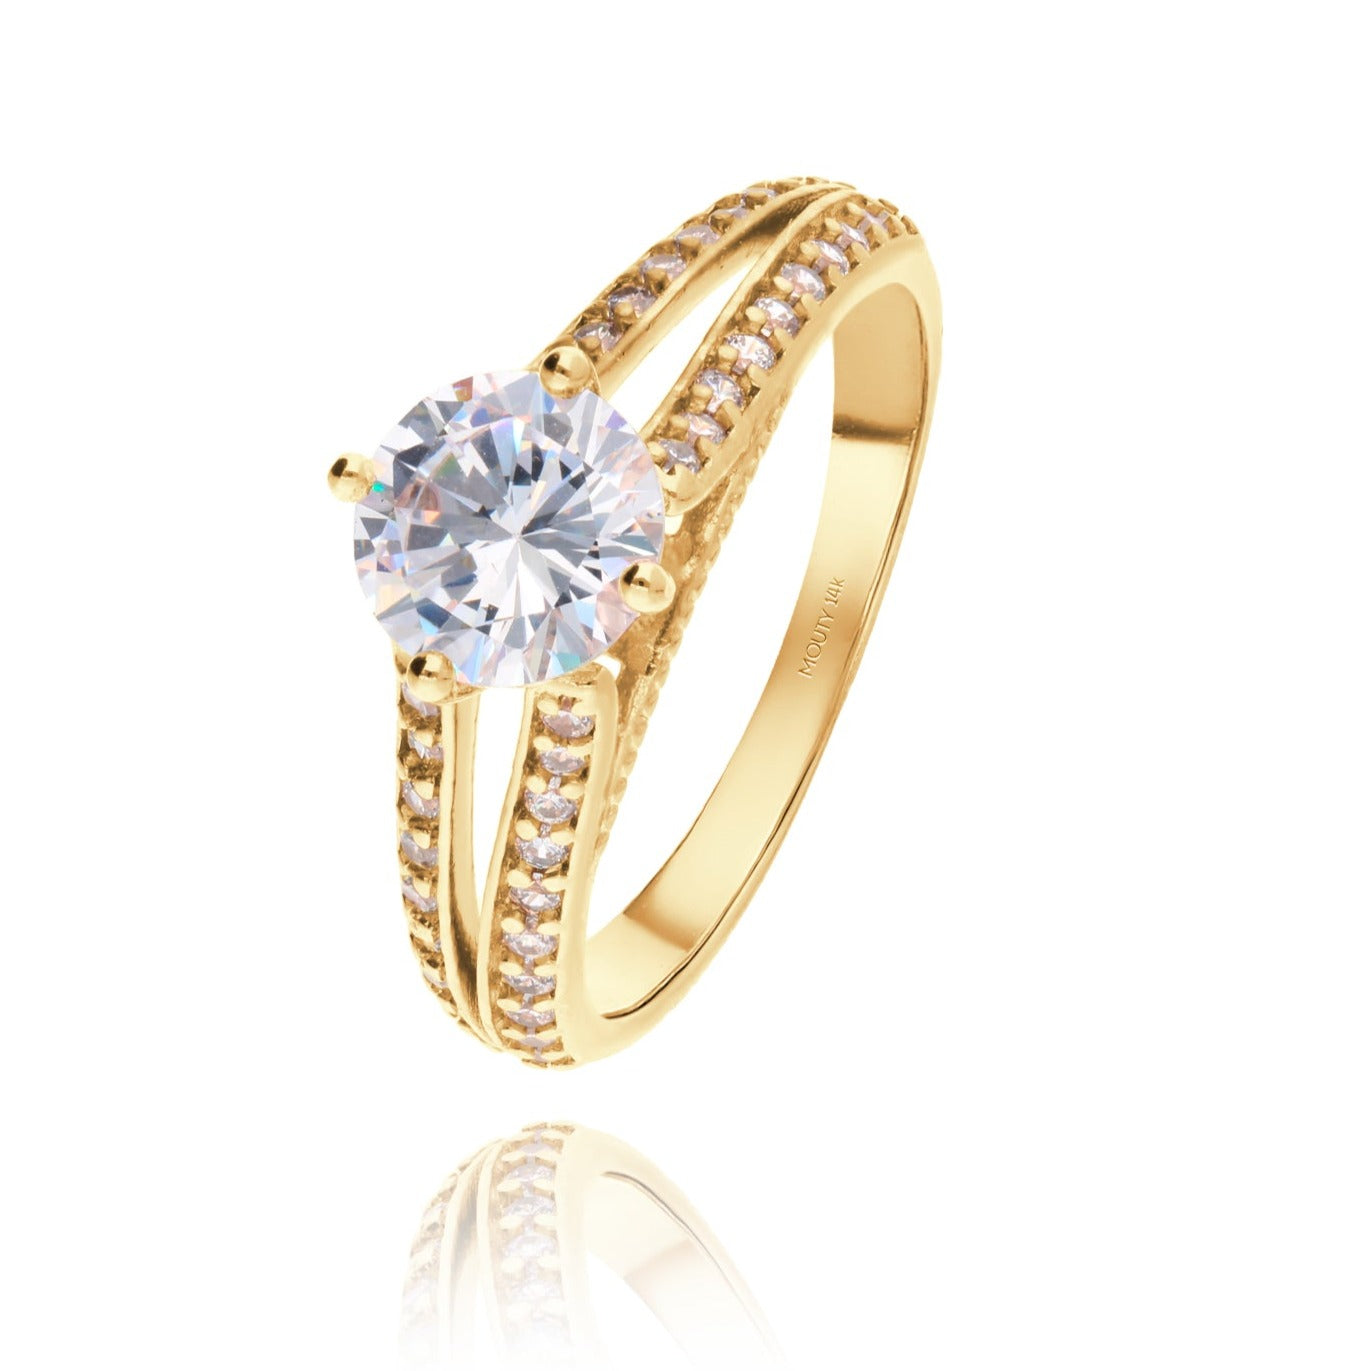 Engagement rings by manufacture in 14k gold